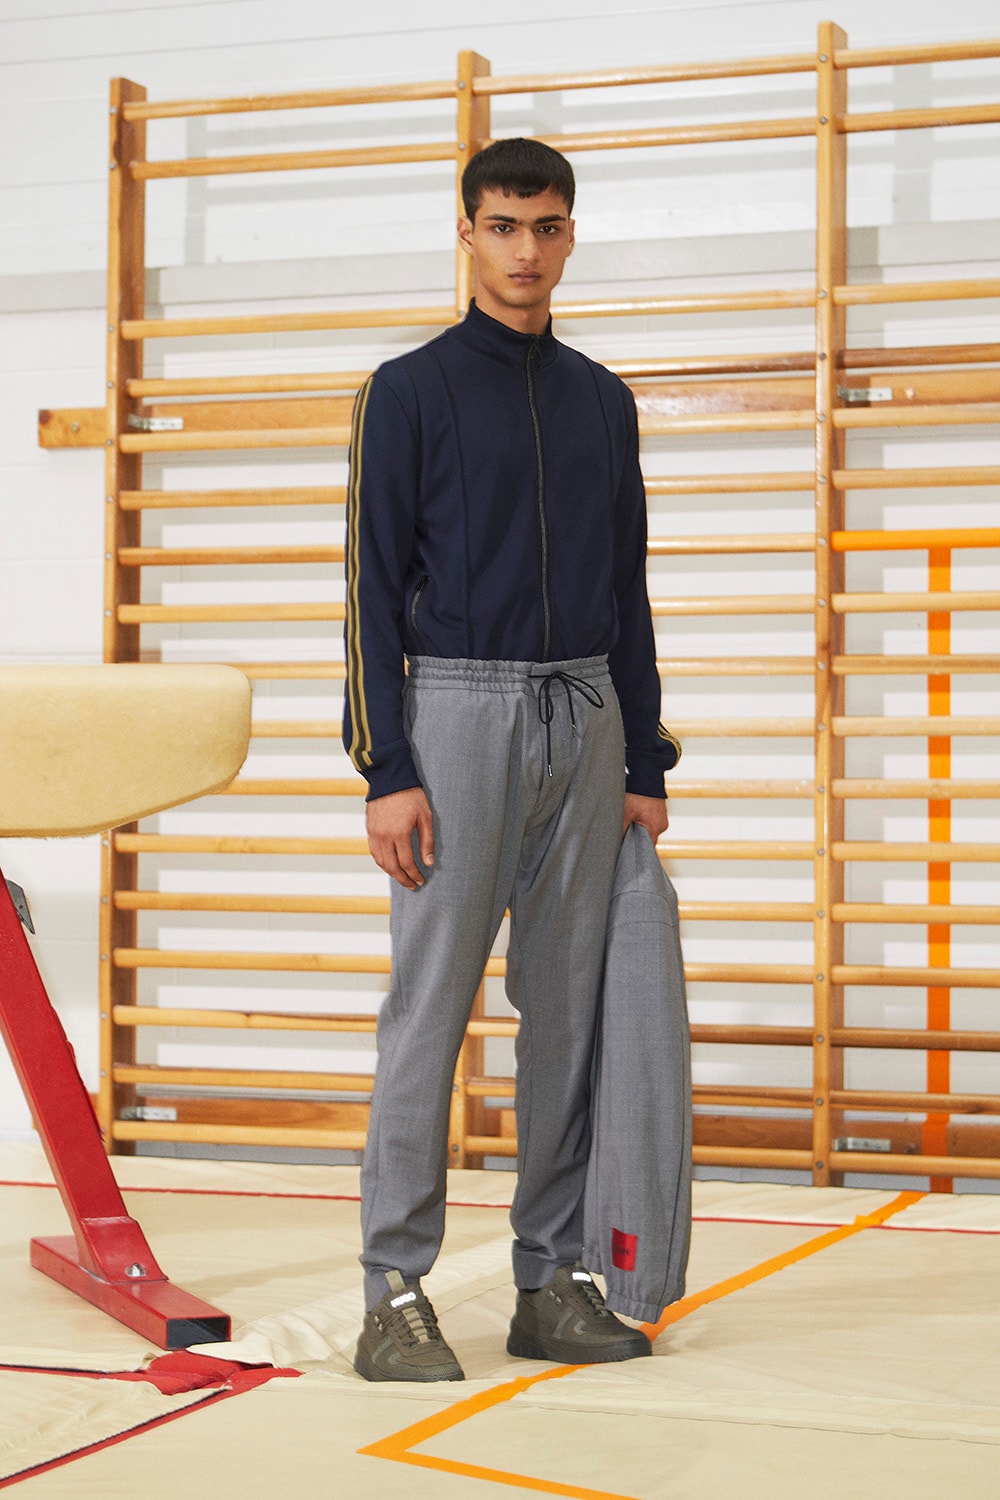 HUGO Presents Track Tailoring Capsule Collection SS20 Hugo Boss Spring Summer 2020